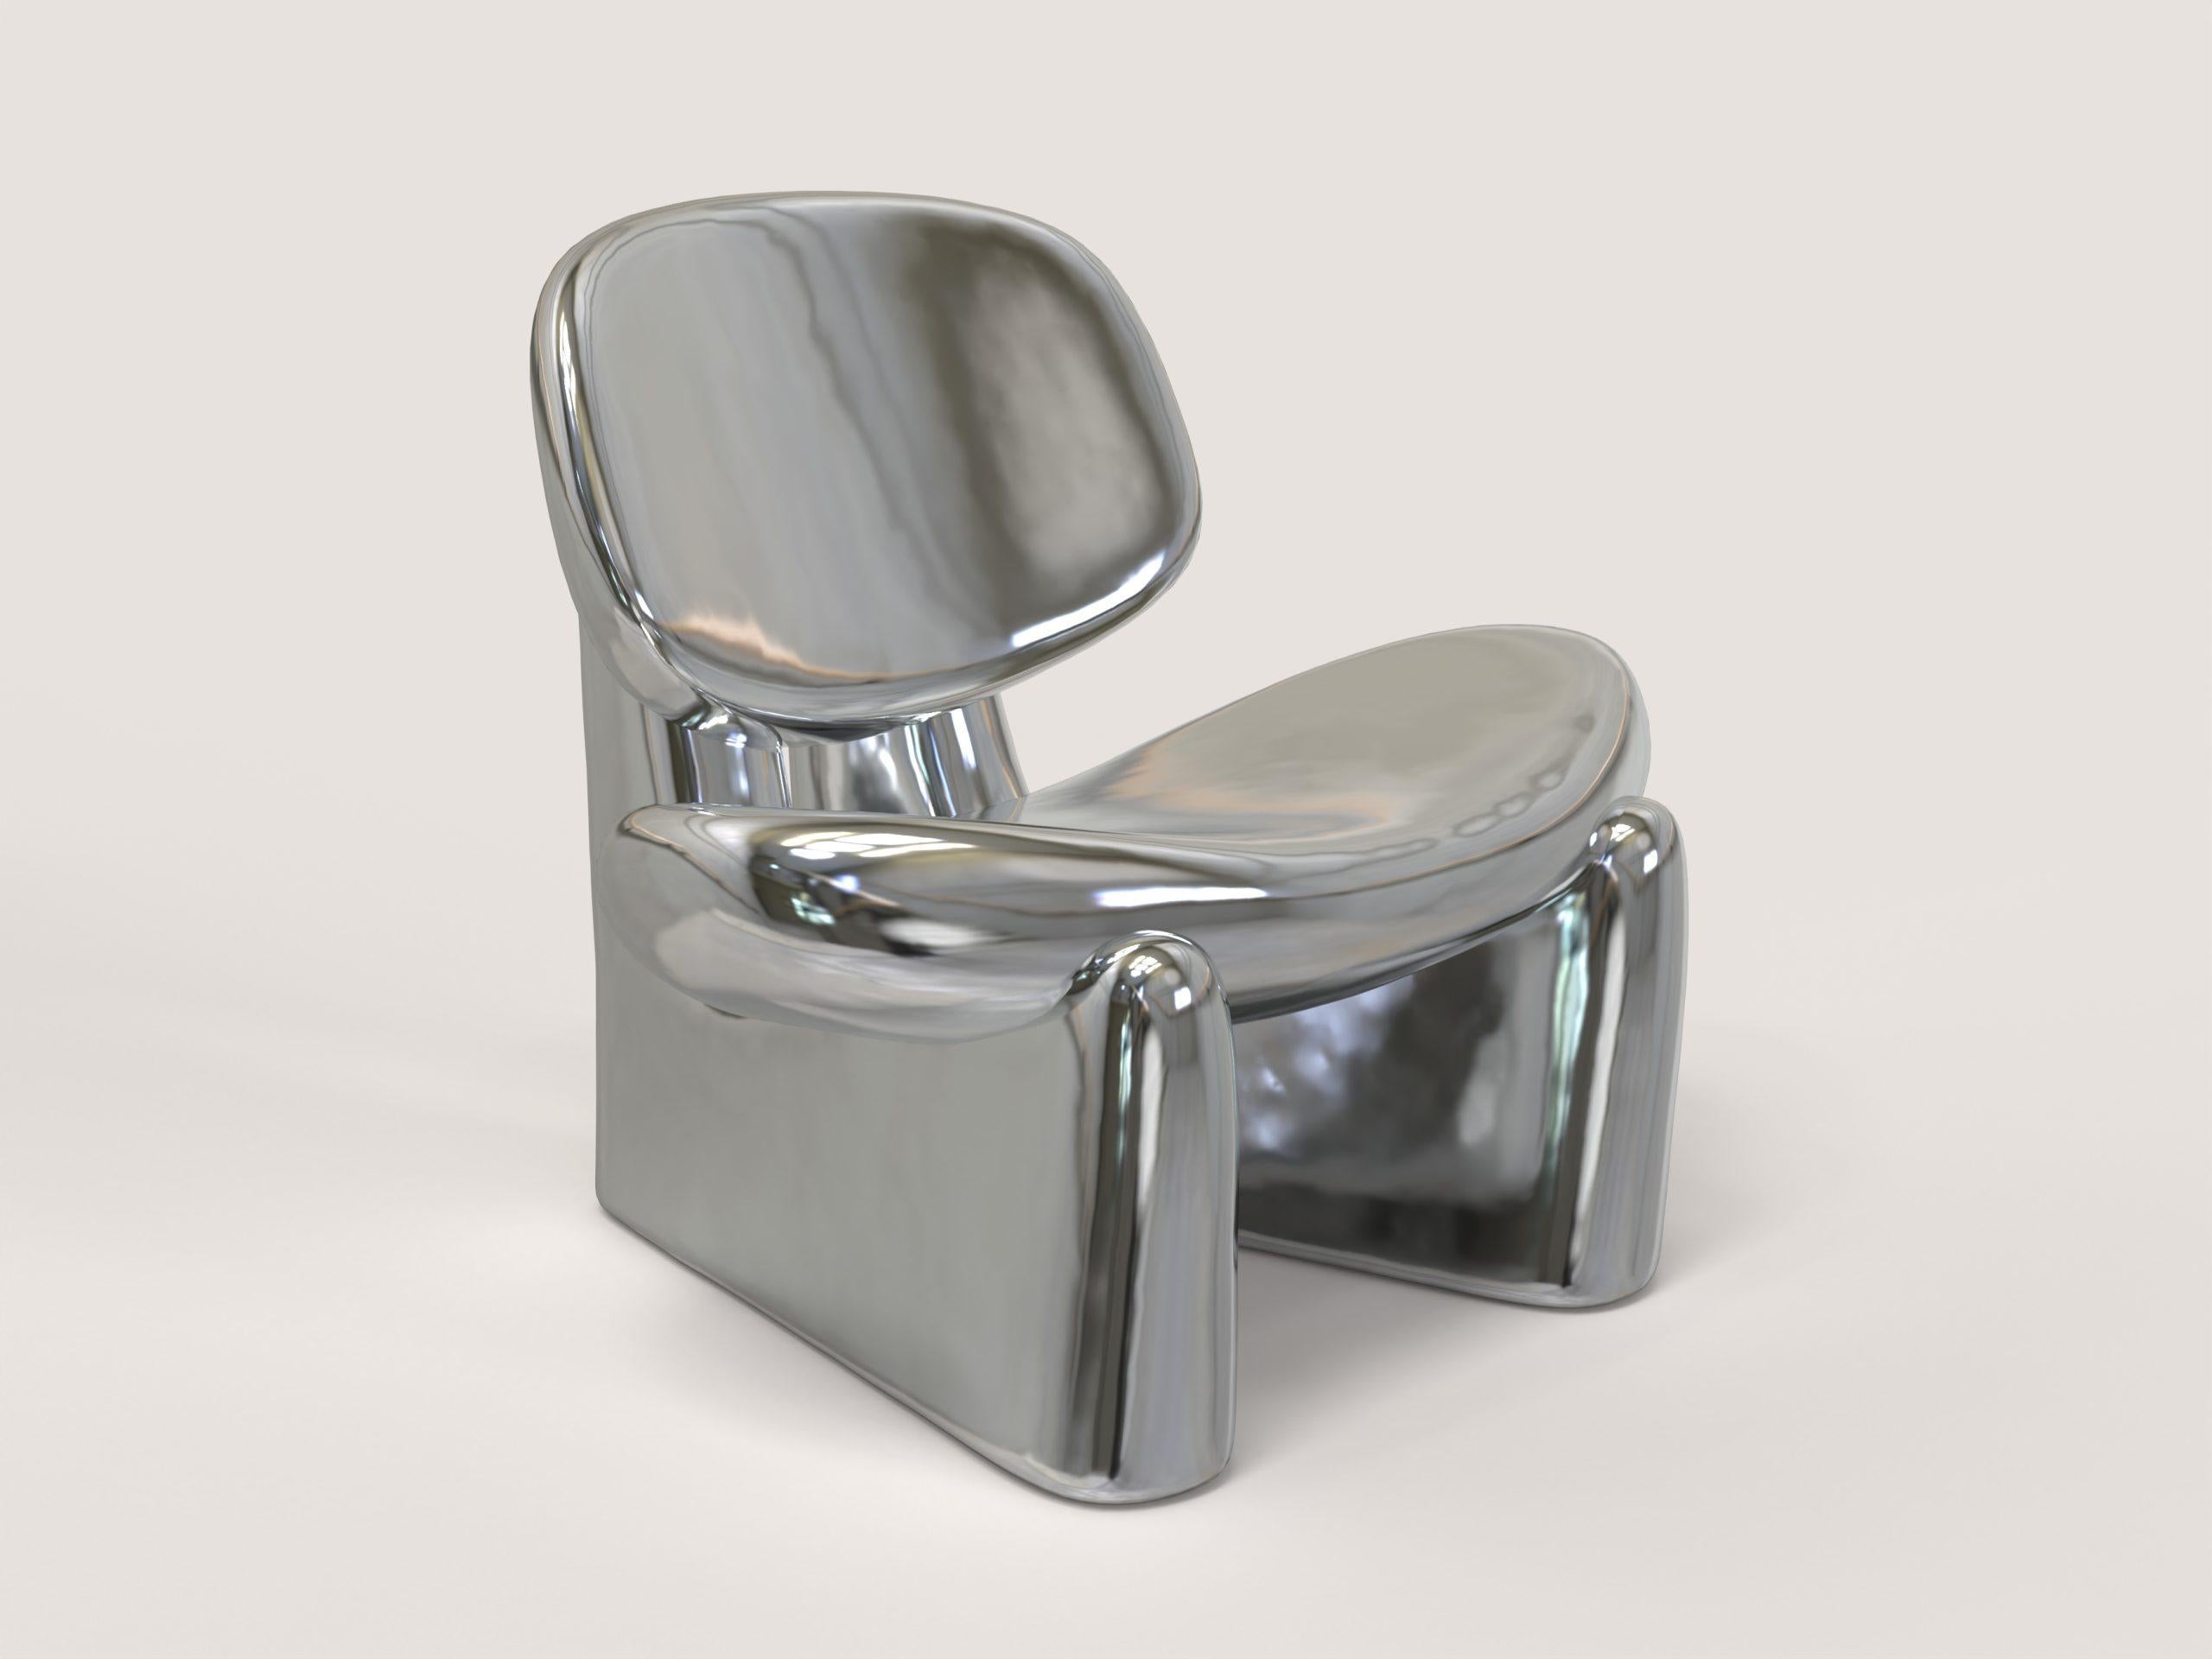 Pau silver V1 armchair by Edizione Limitata
Limited Edition of 150 pieces. Signed and numbered.
Dimensions: D 71 x W 81 x H 72 cm.
Materials: Resin-coated polistyrene with metallic paint.

Edizione Limitata, that is to say “Limited Edition”, is